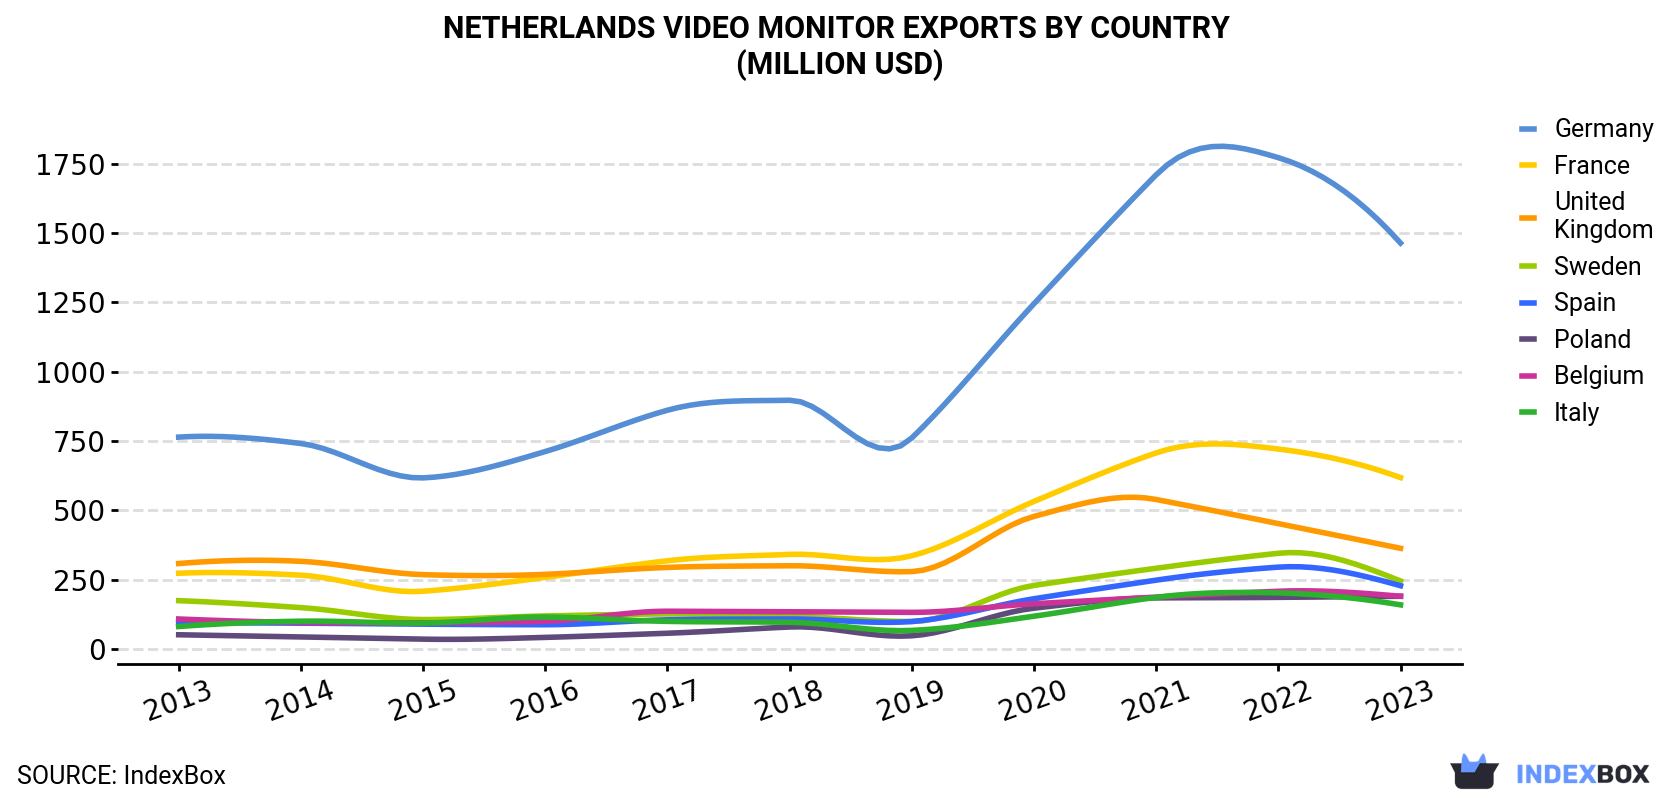 Netherlands Video Monitor Exports By Country (Million USD)